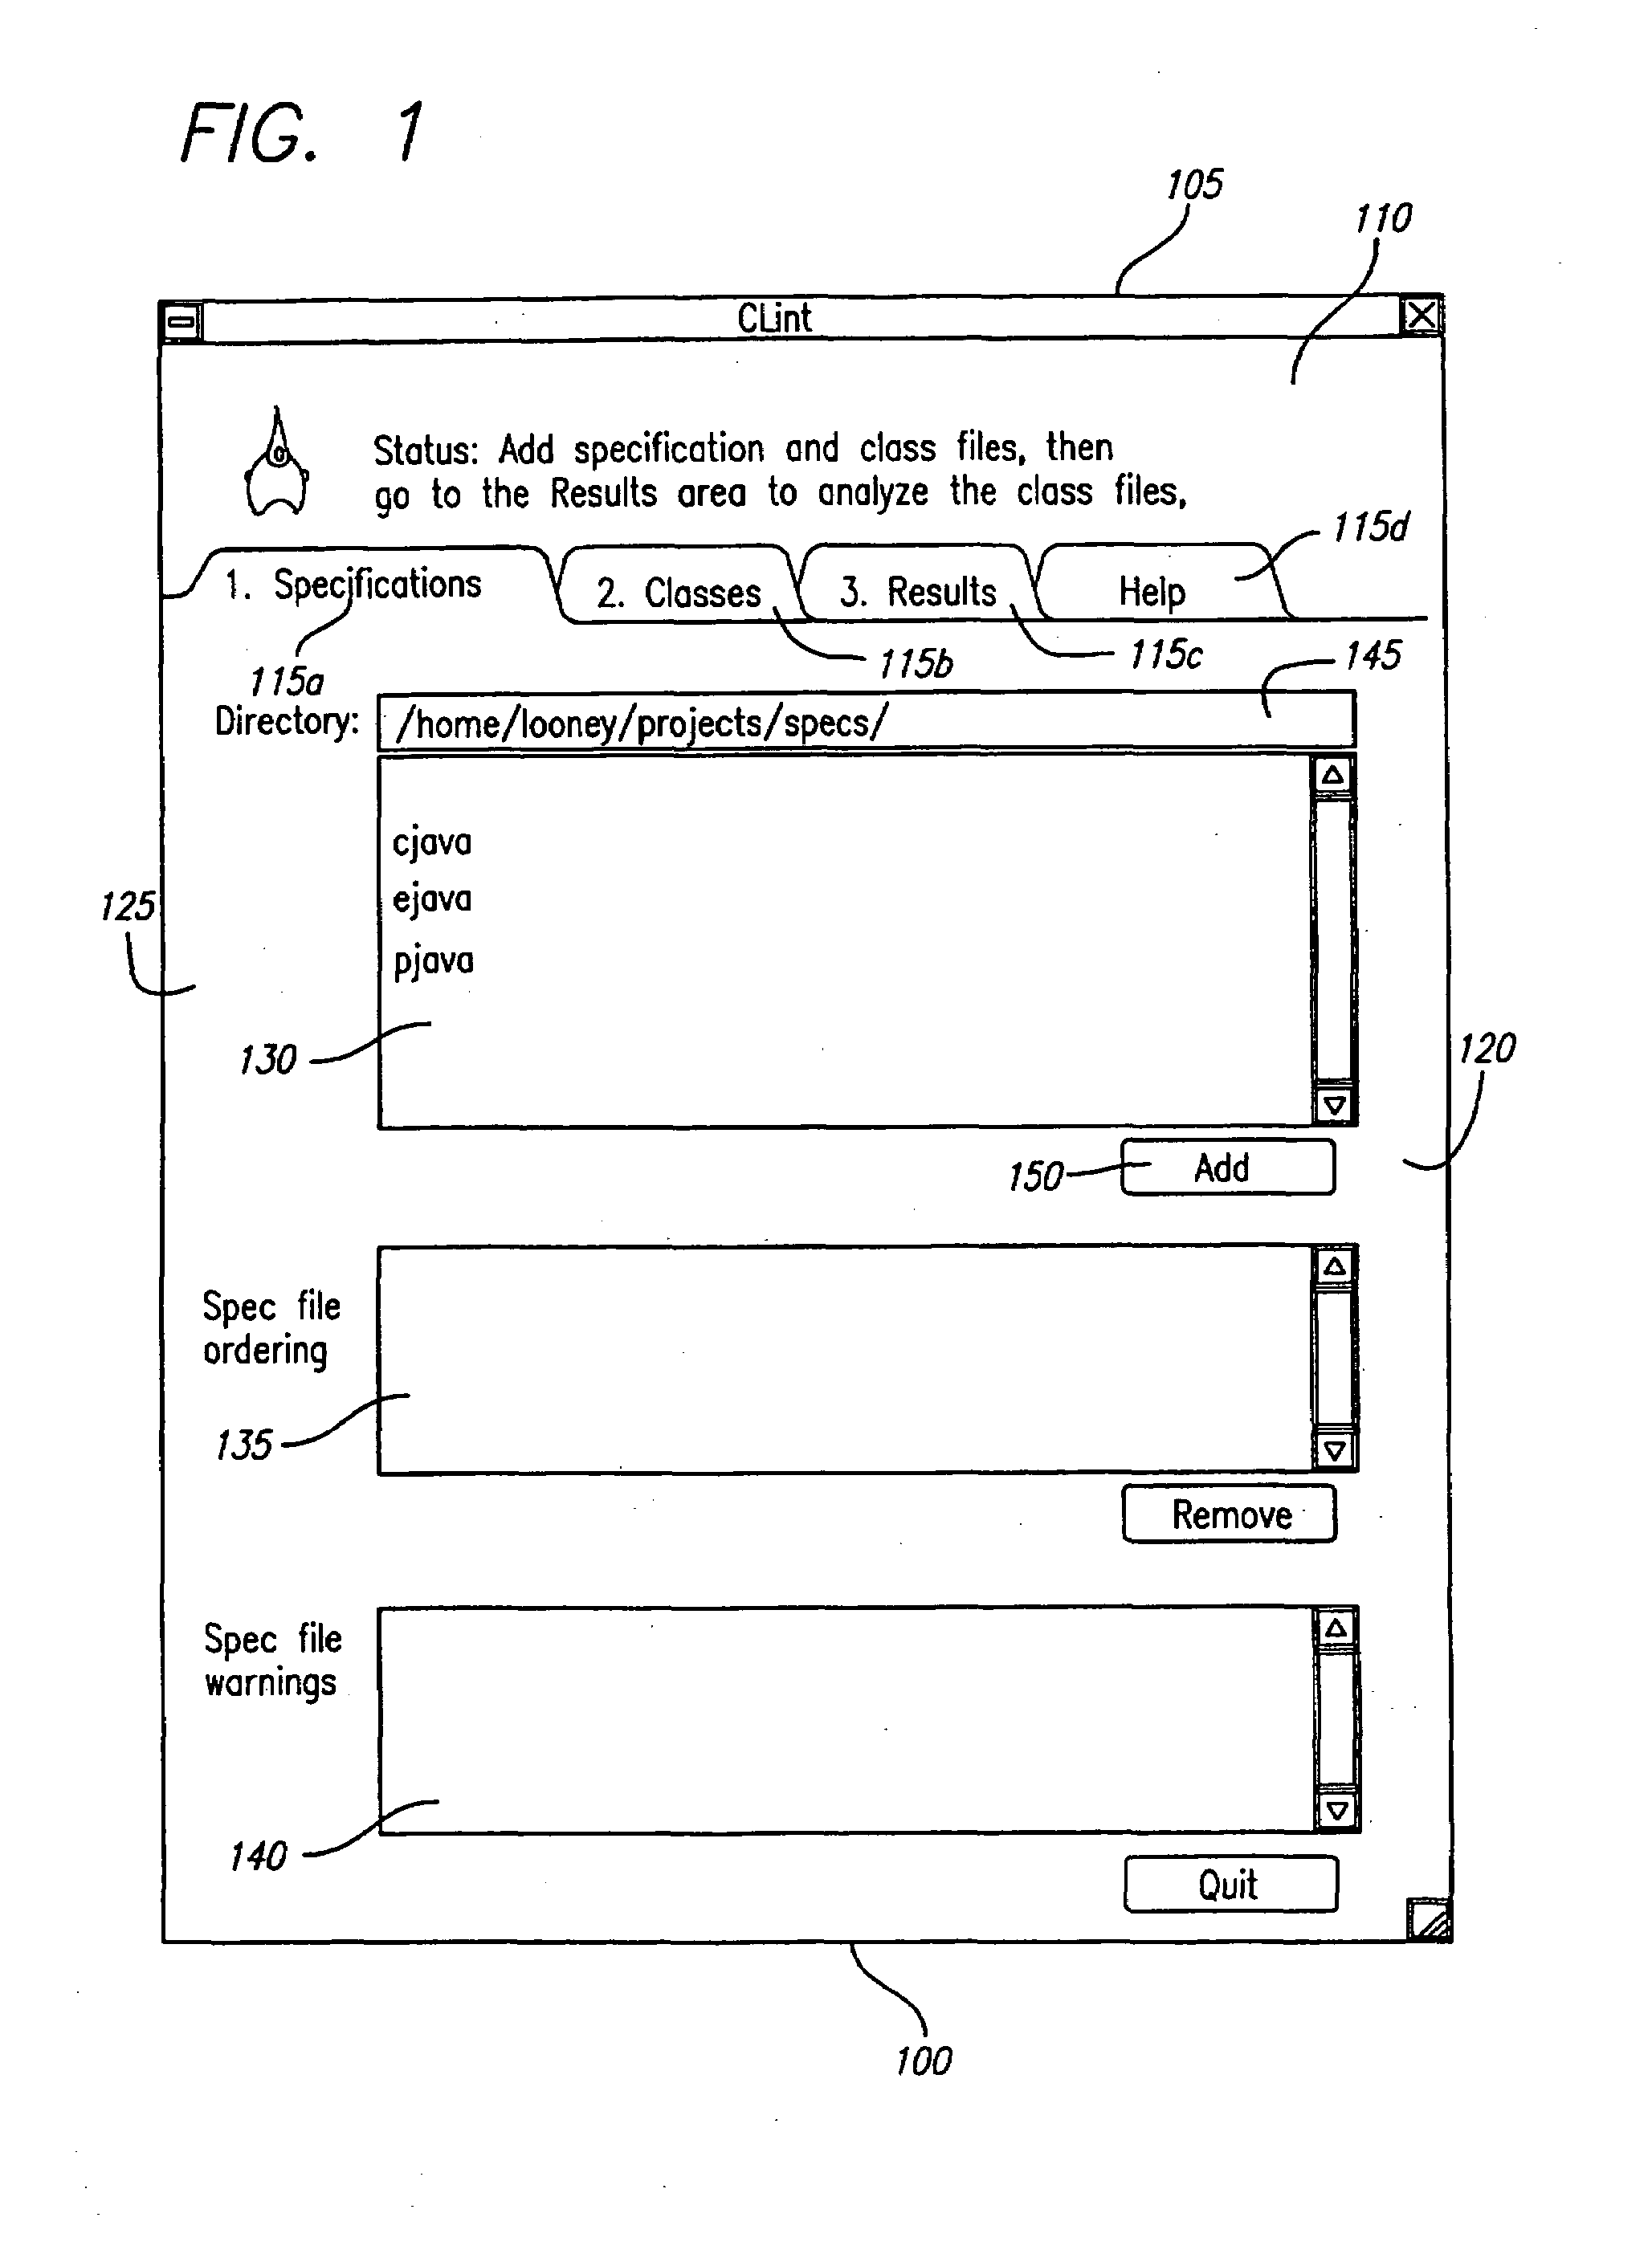 Method and apparatus for analyzing data